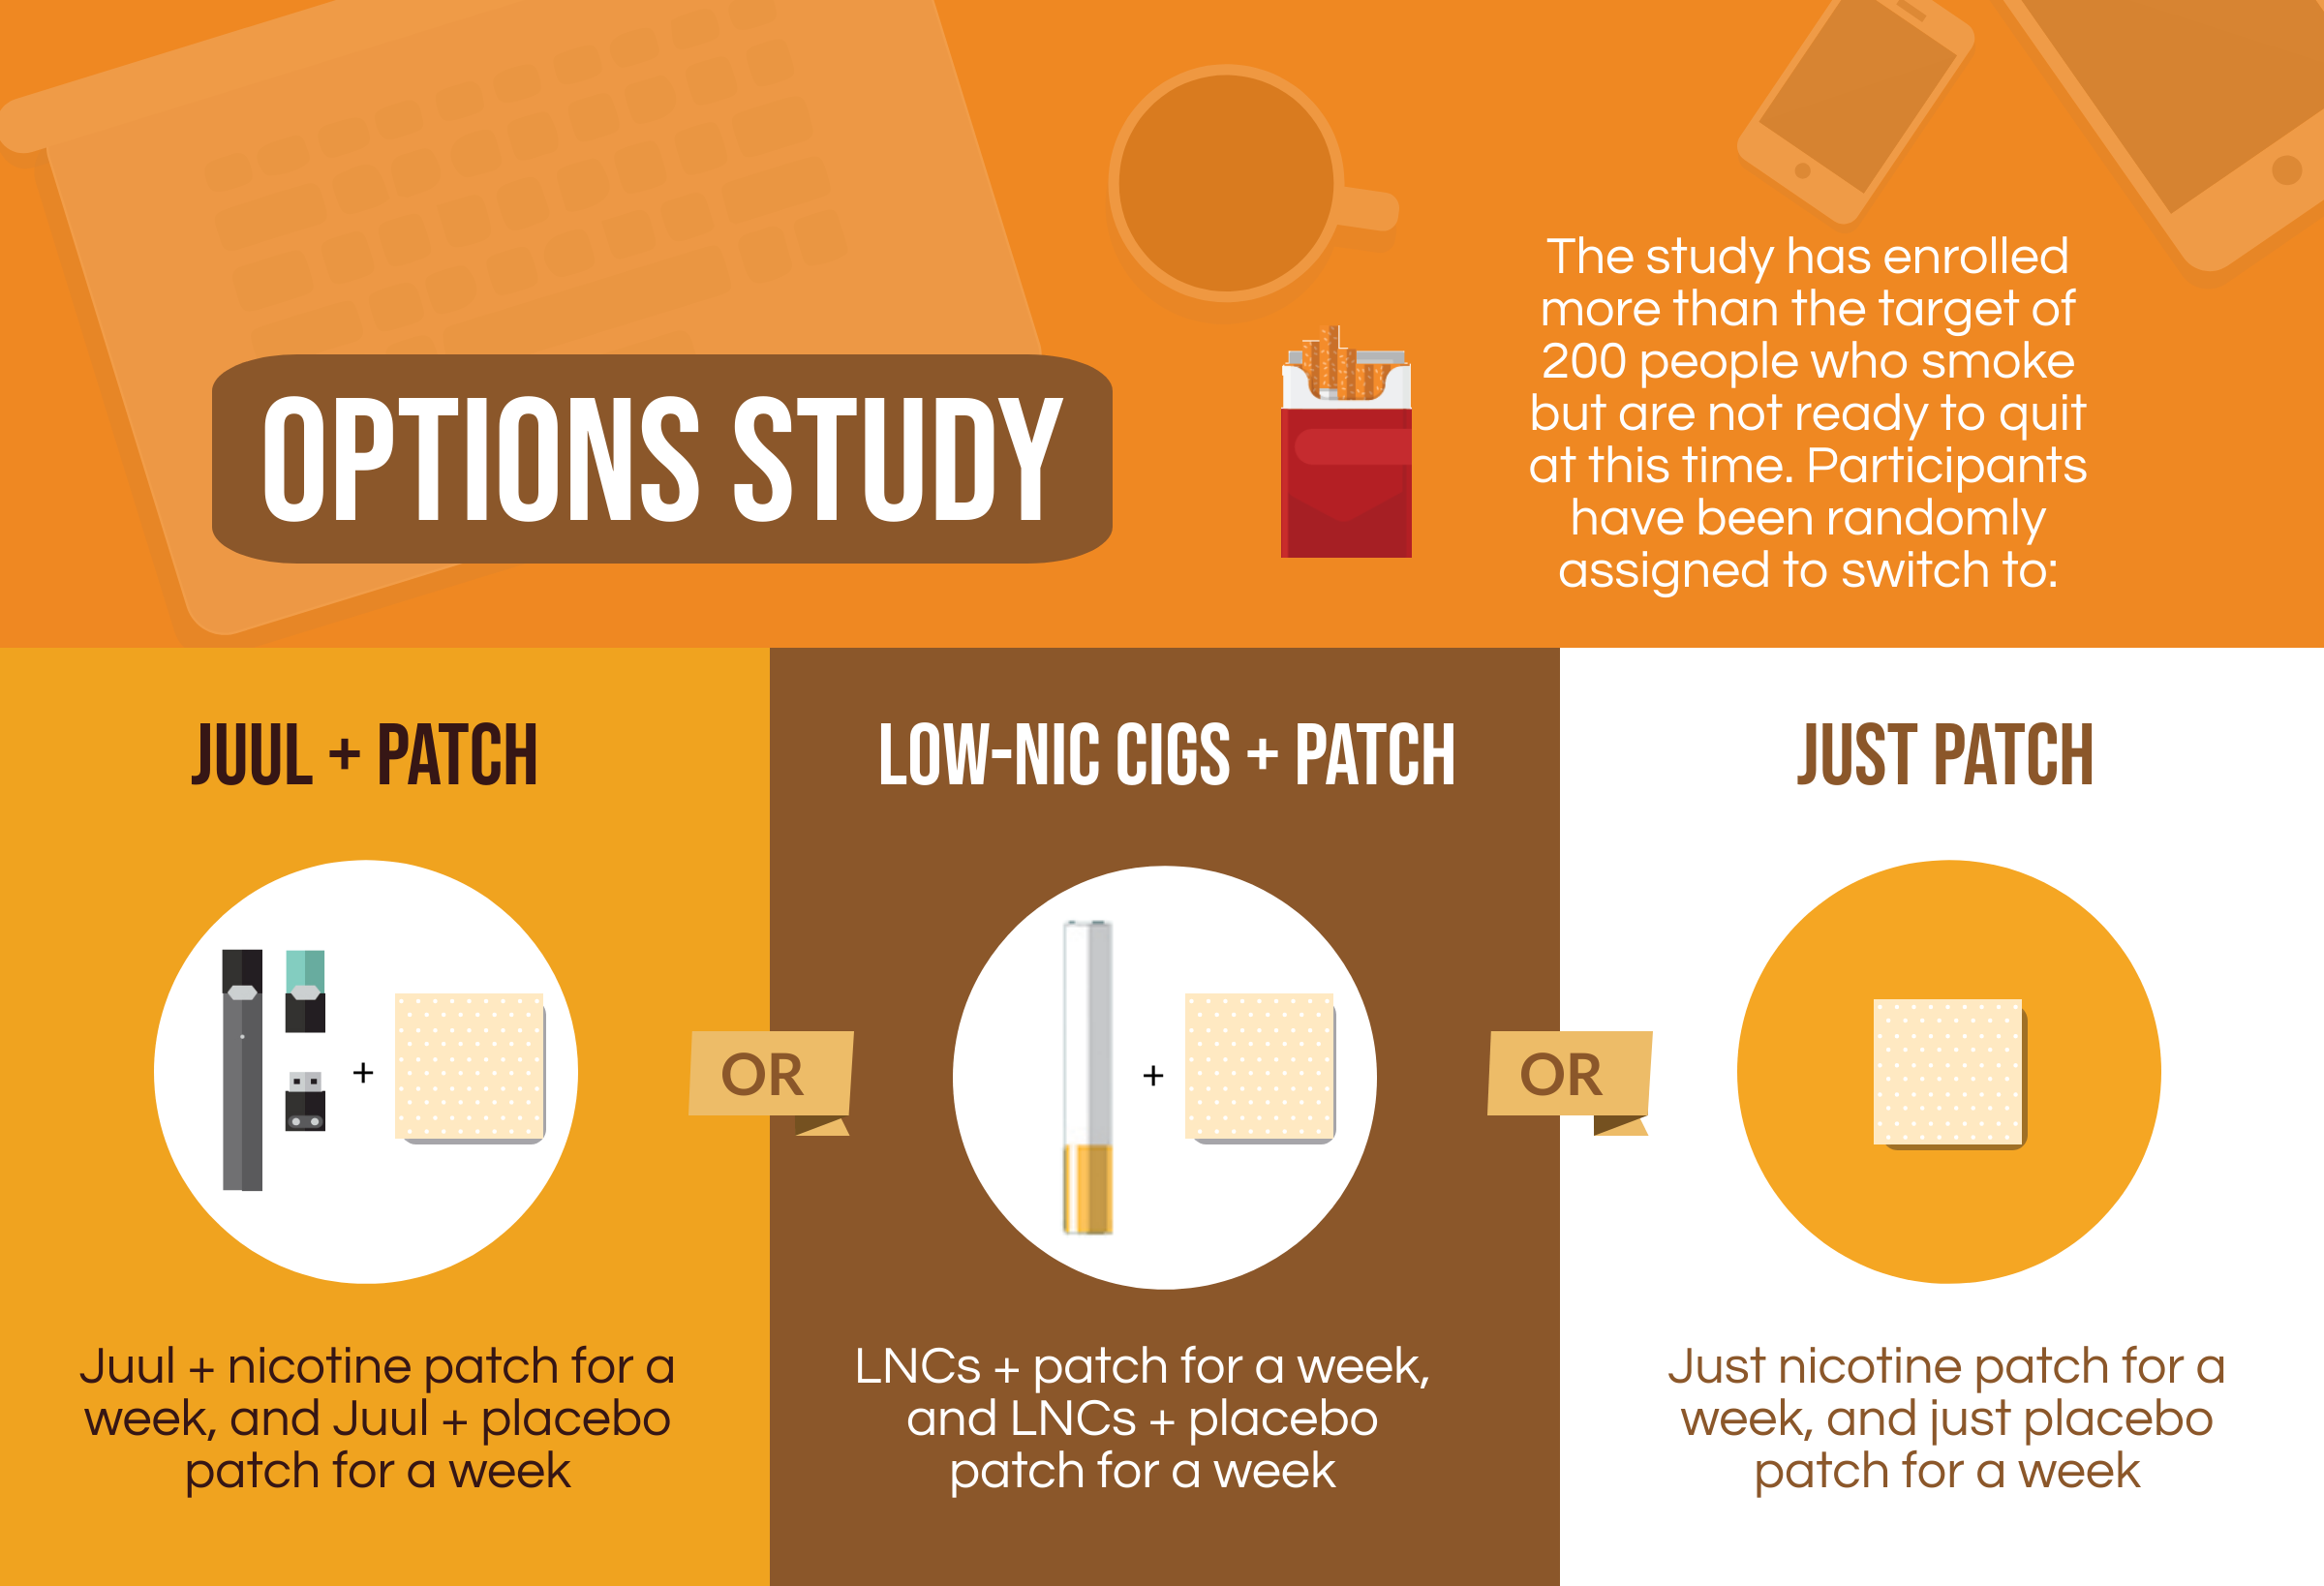 The Options study has enrolled more than the target of 200 people who smoke but are not ready to quit at this time. Participants have been randomly assigned to switch to: Juul + nicotine patch for a week, and Juul + placebo patch for a week or LNCs + patch for a week, and LNCs + placebo patch for a week or Just nicotine patch for a week, and just placebo patch for a week